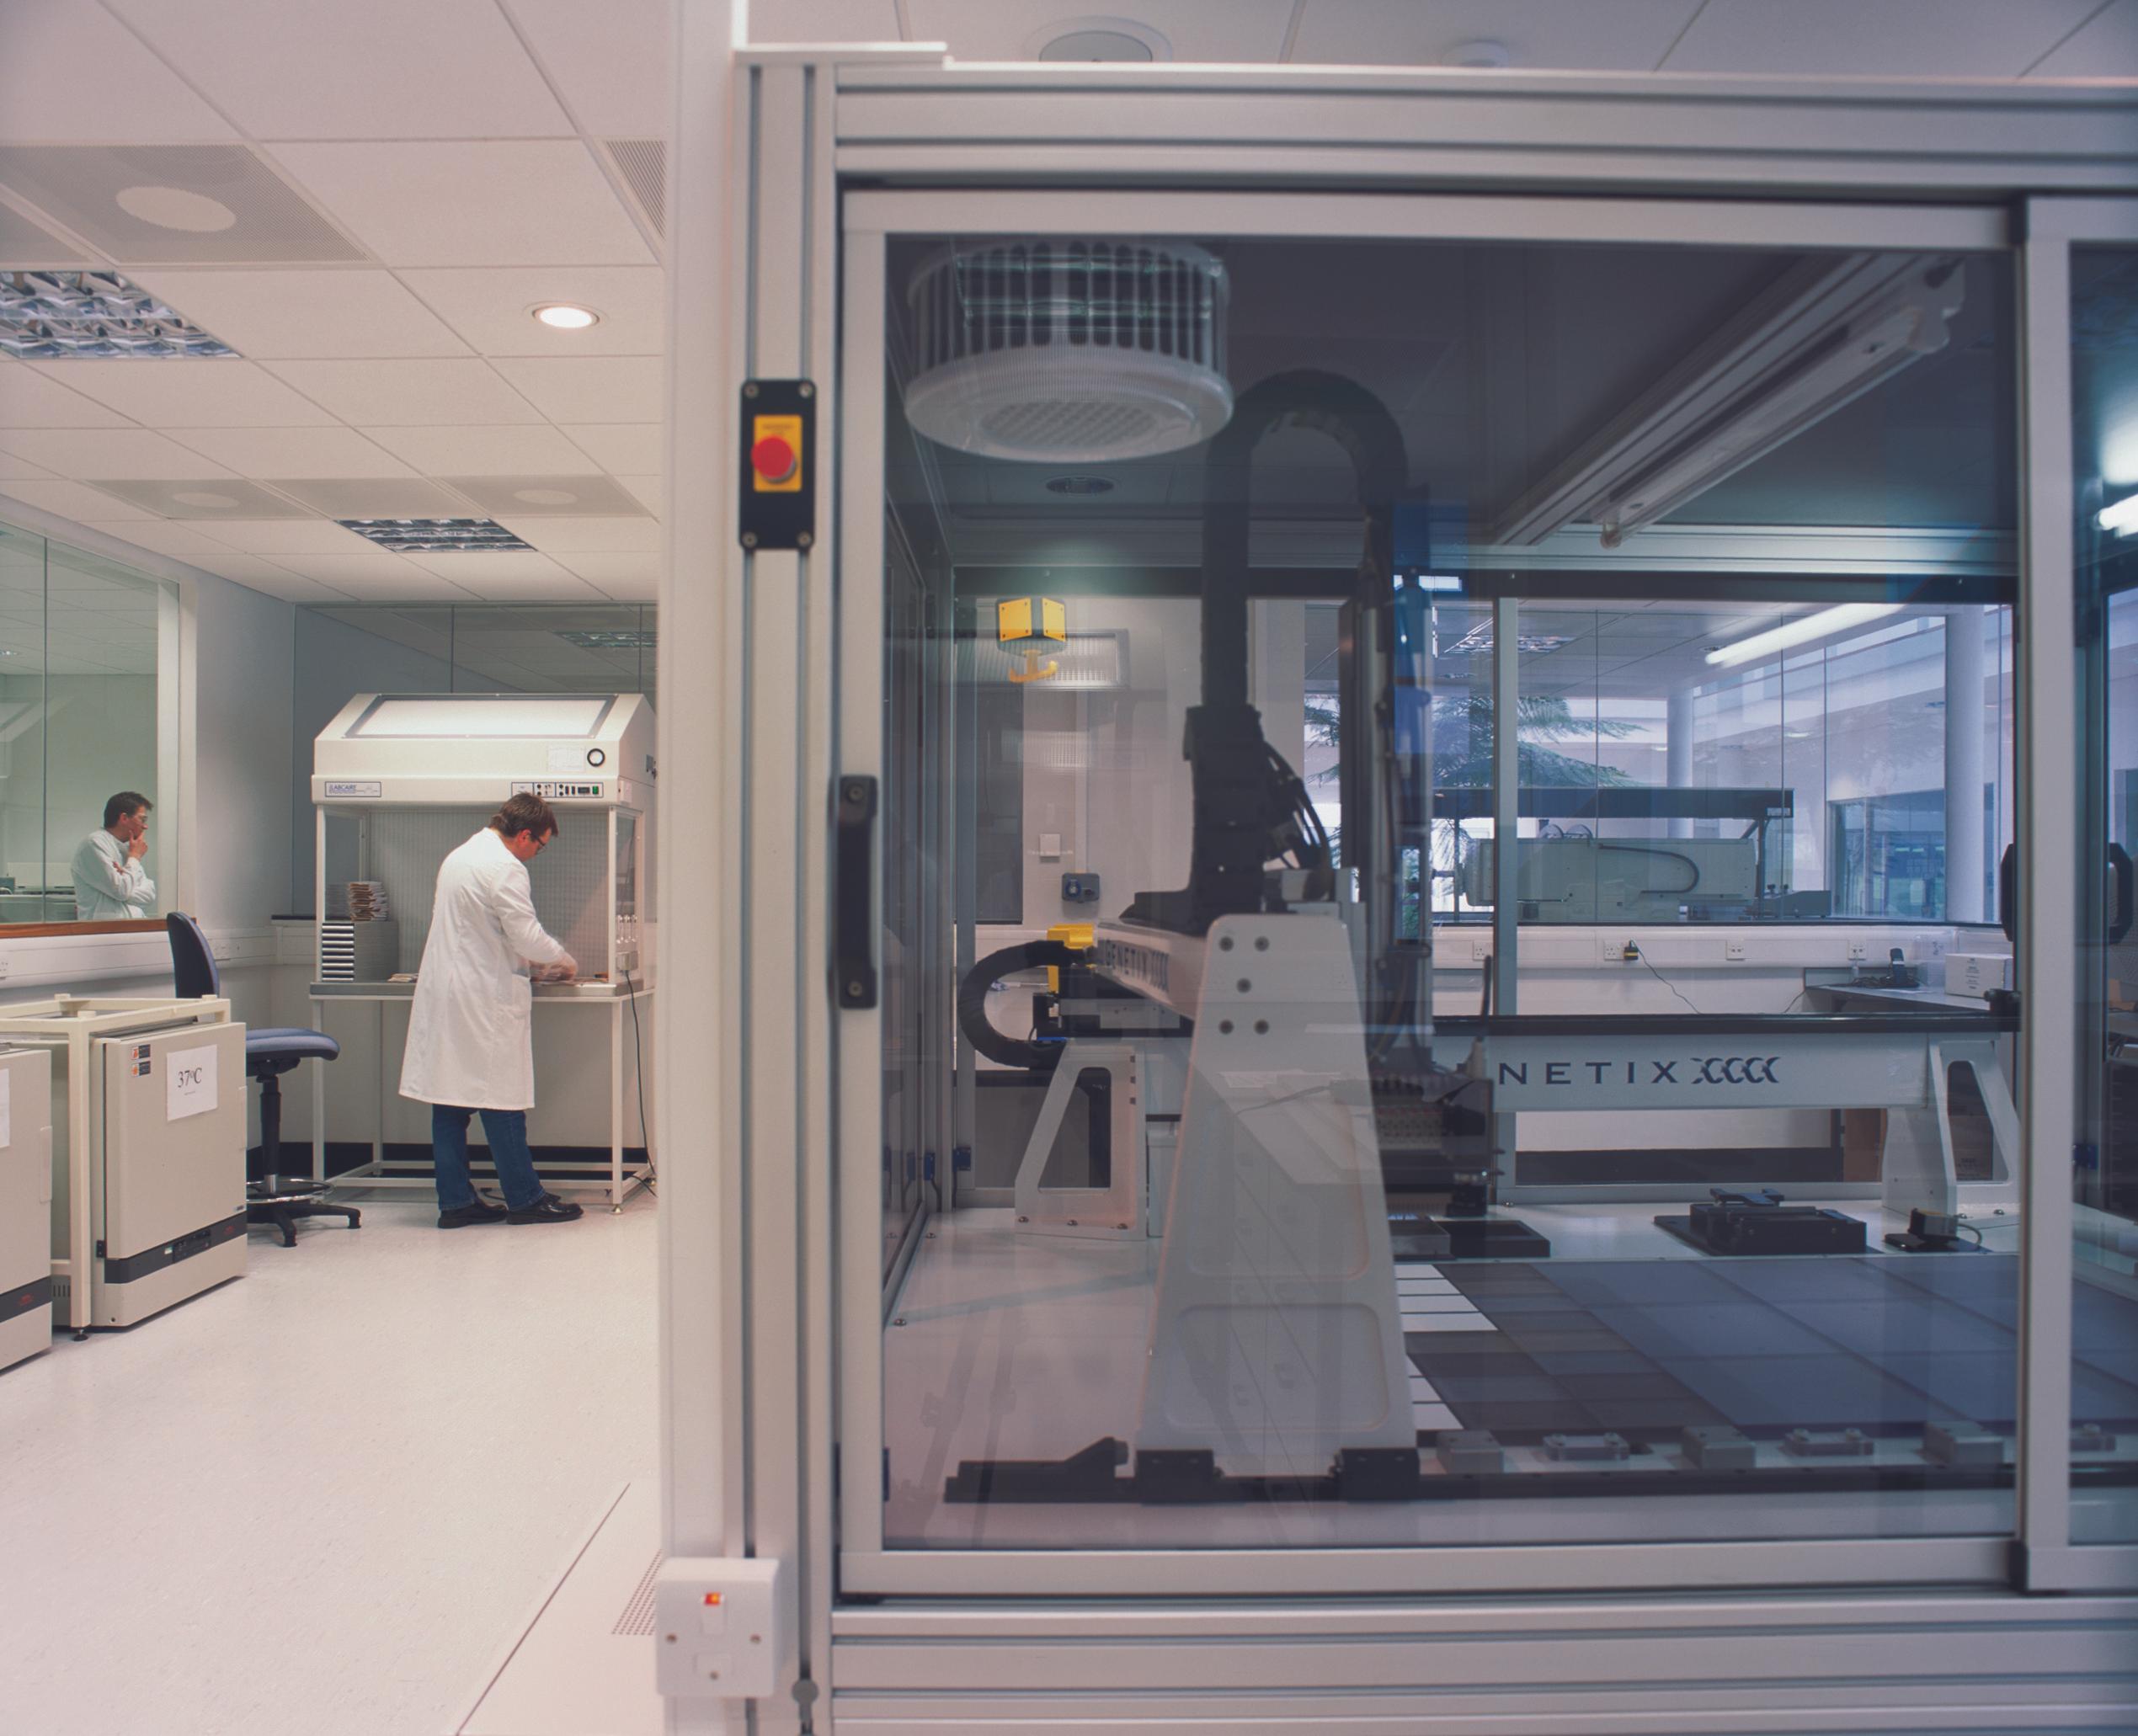 scientists in lab coats working beside a glazed specialized lab equipment room for testing genomes